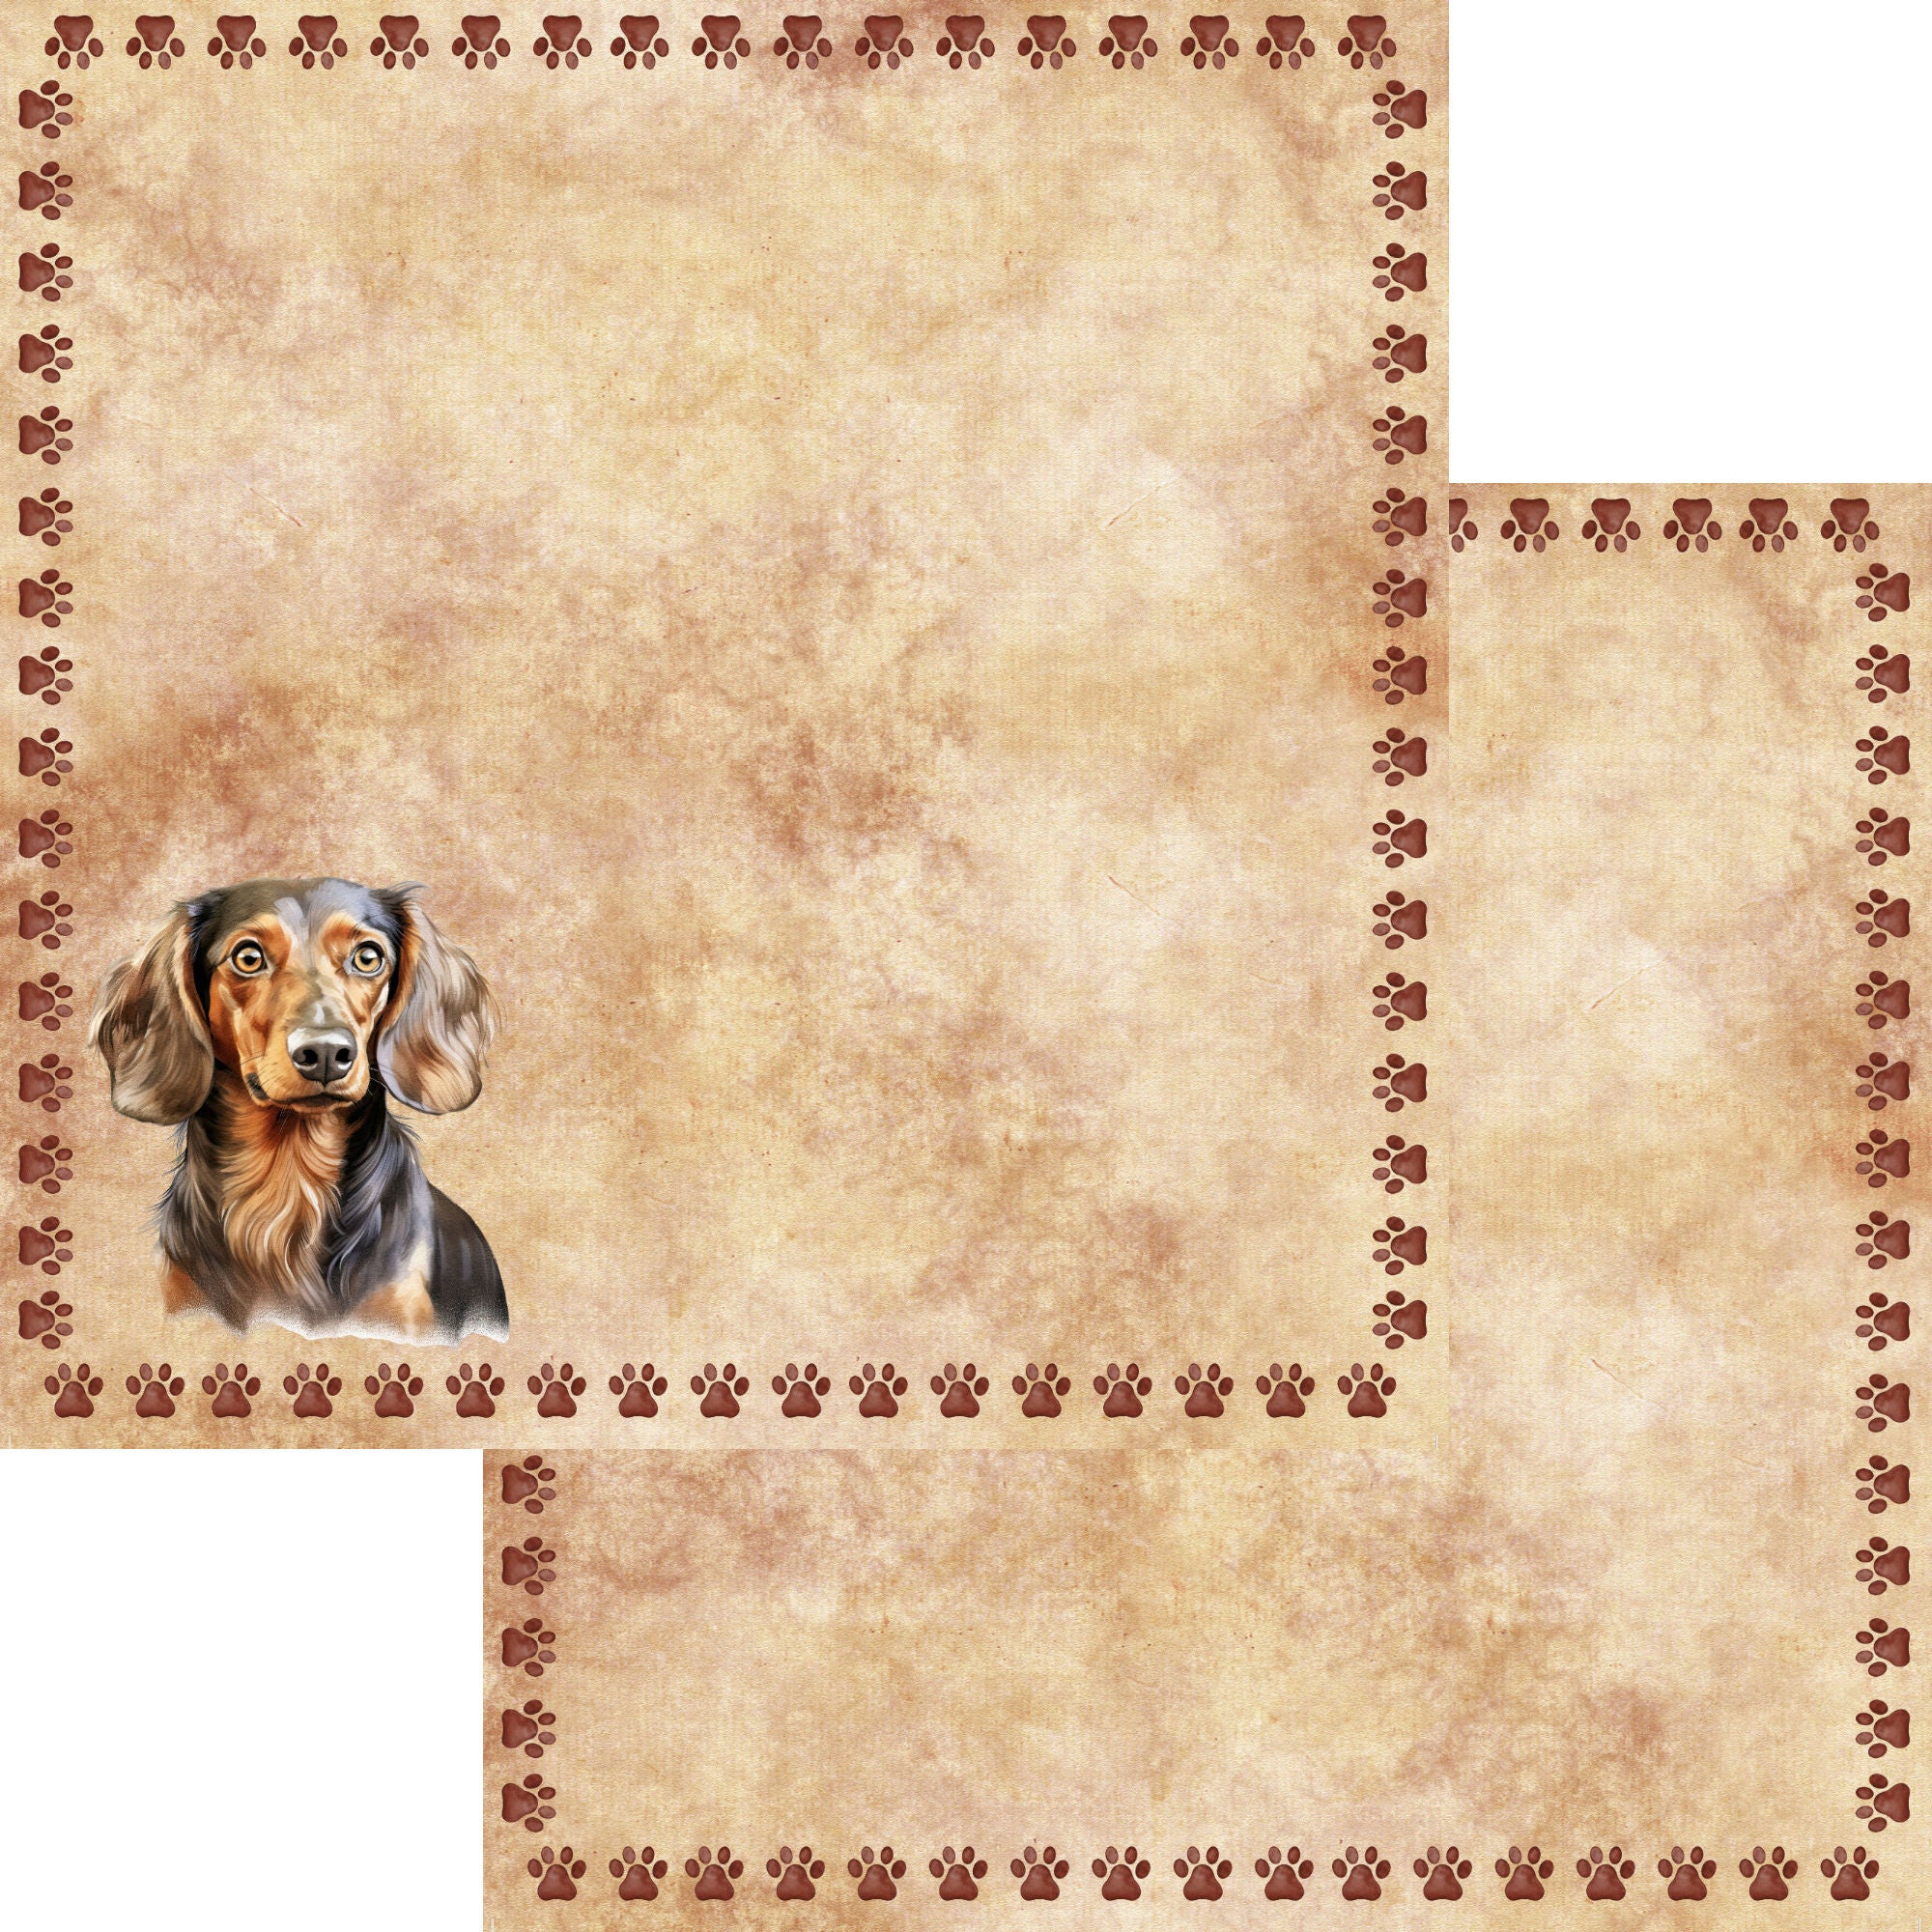 Dog Breeds Collection Dachshund 12 x 12 Double-Sided Scrapbook Paper by SSC Designs